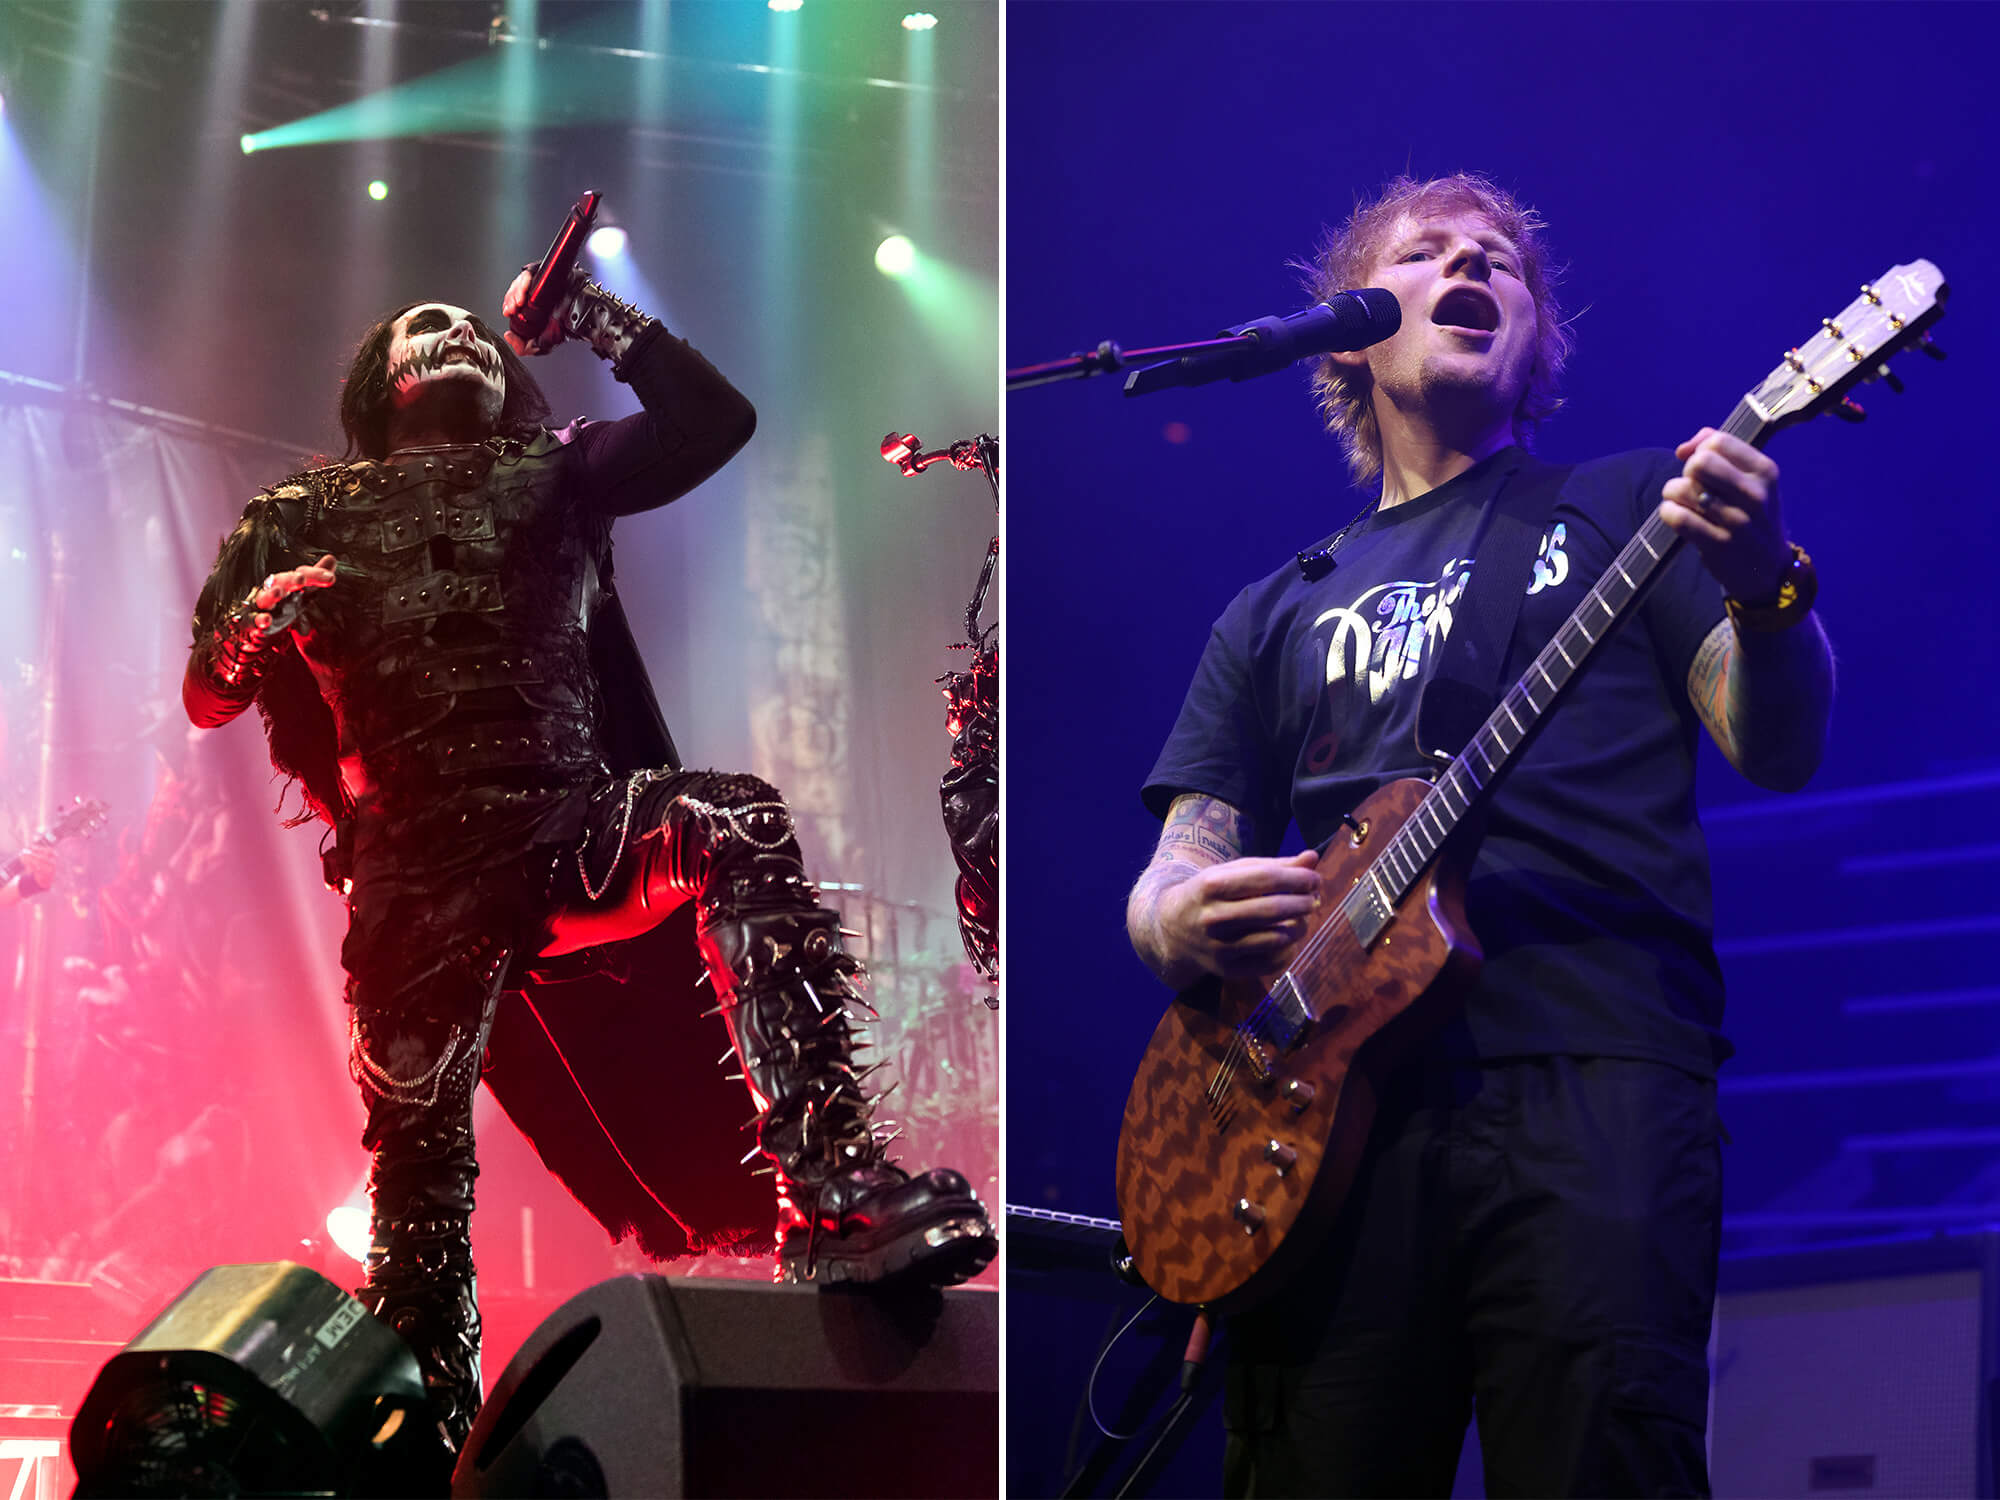 Dani Filth (left) on stage wearing an all-black stage outfit. He is singing into a mic and wears black and white face paint. Ed Sheeran (right) on stage playing guitar. He is wearing a t-shirt and has red hair.